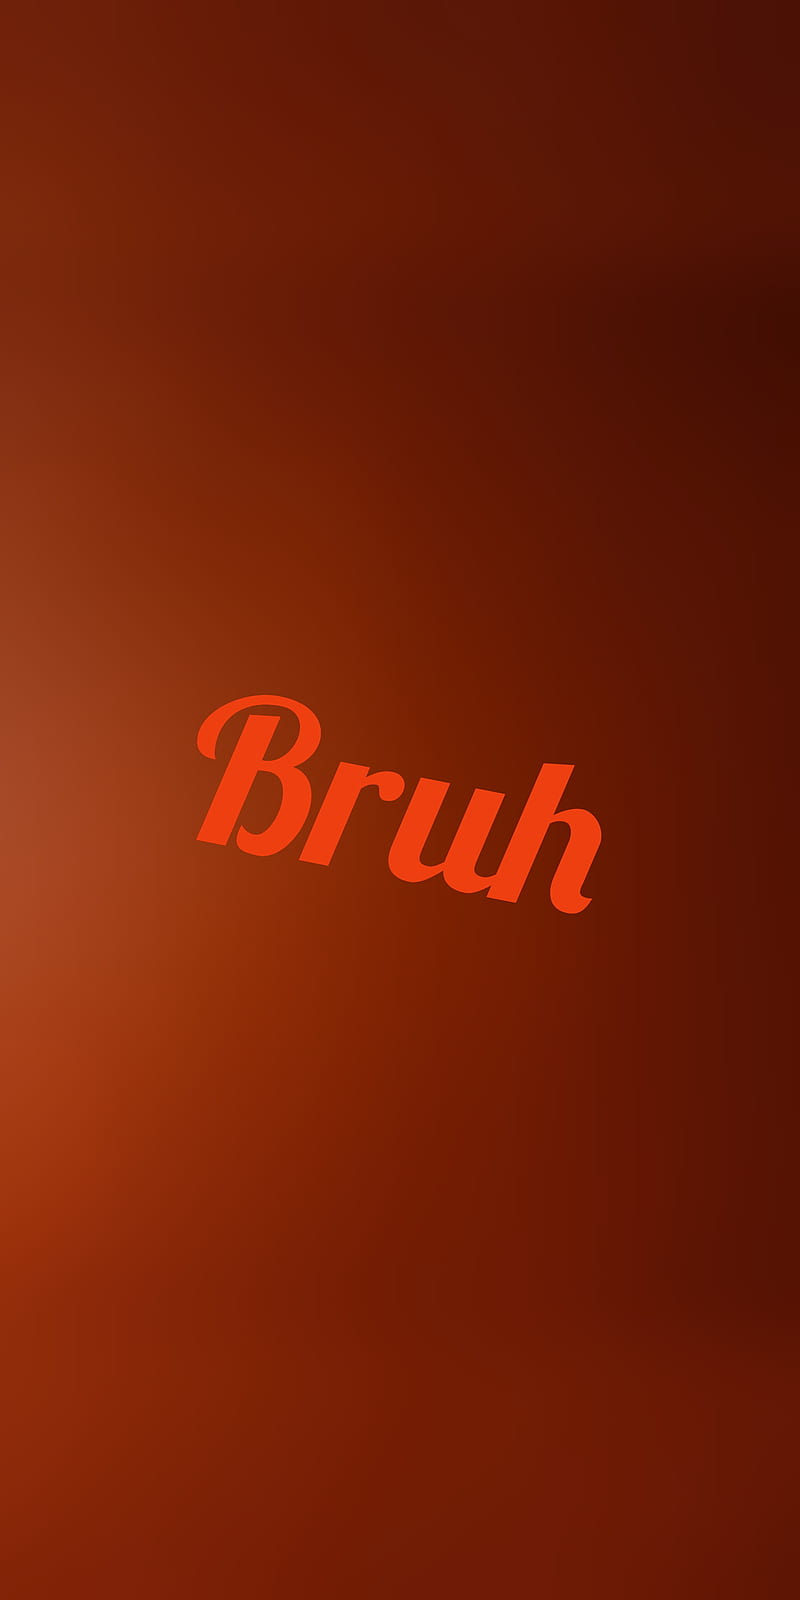 Free Bruh Wallpaper online  Other  Listiacom Auctions for Free Stuff